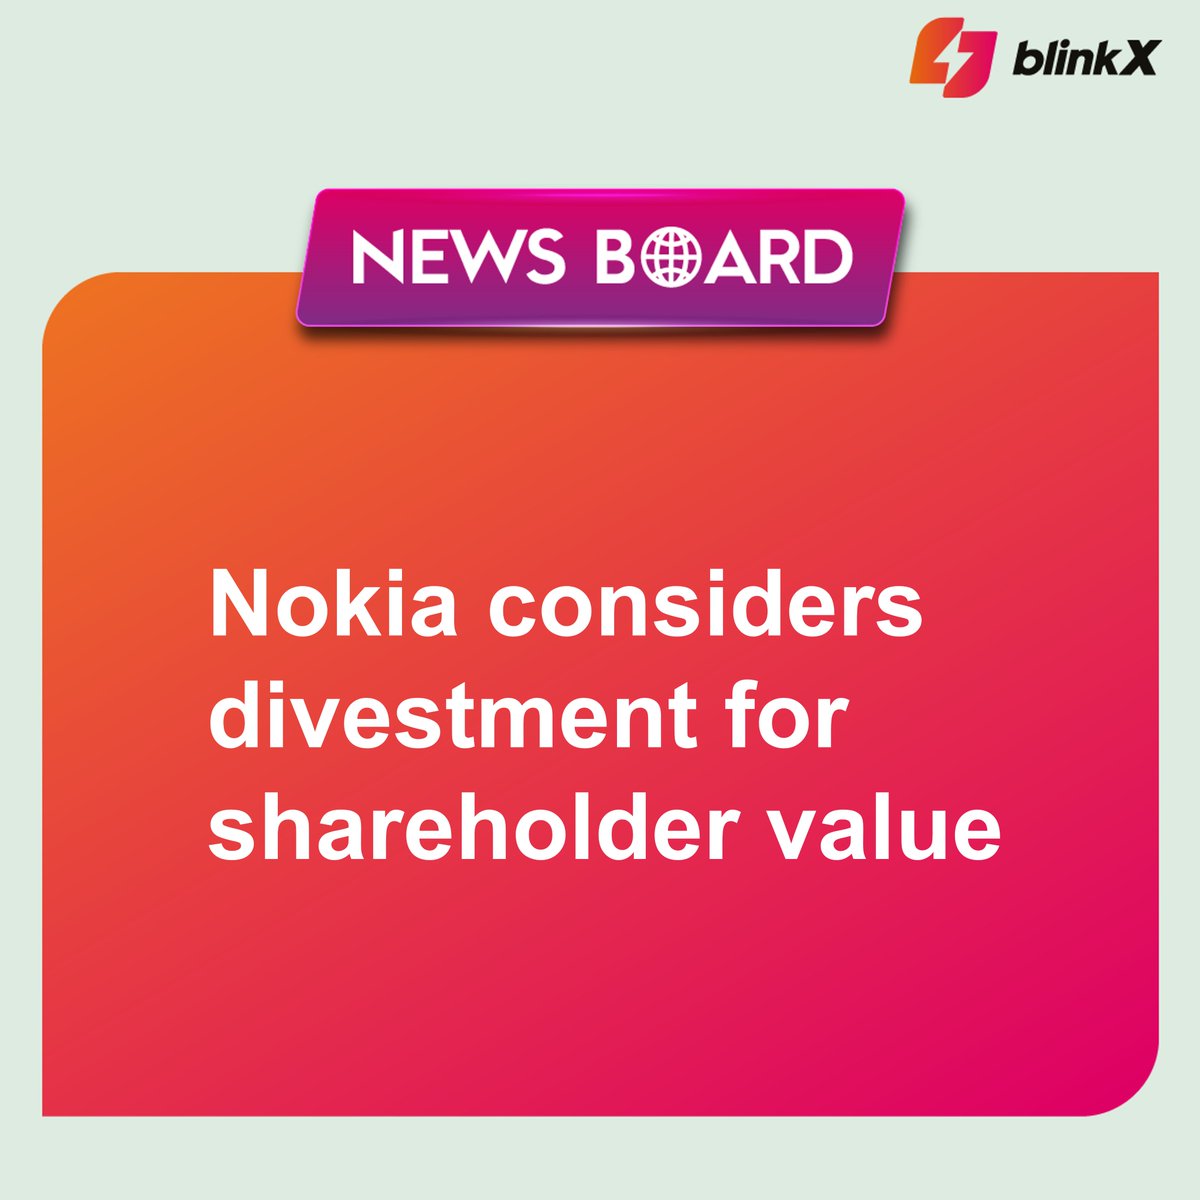 Nokia explores divestment to enhance shareholder value, prioritizing market leadership and efficiency. Embracing clear structures and eyeing India's 6G prospects amid global shifts. 

#Nokia #BusinessStrategy #MarketLeadership #ShareholderValue #nse #bse #stockmarket #investing